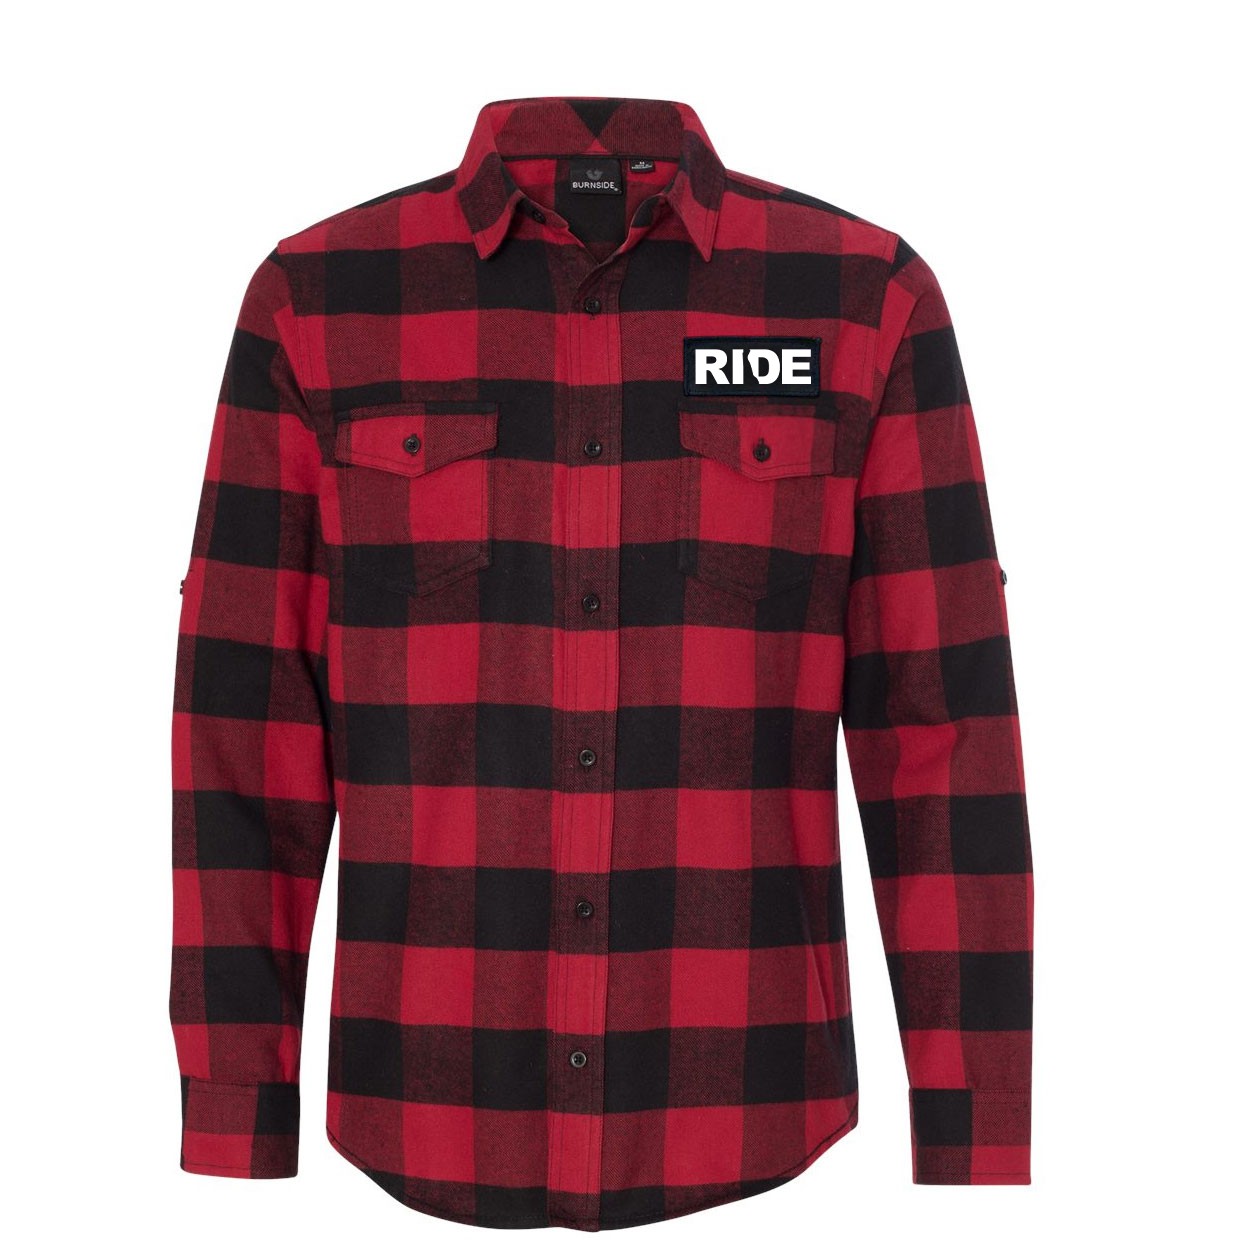 Ride Delaware Classic Unisex Long Sleeve Woven Patch Flannel Shirt Red/Black Buffalo (White Logo)